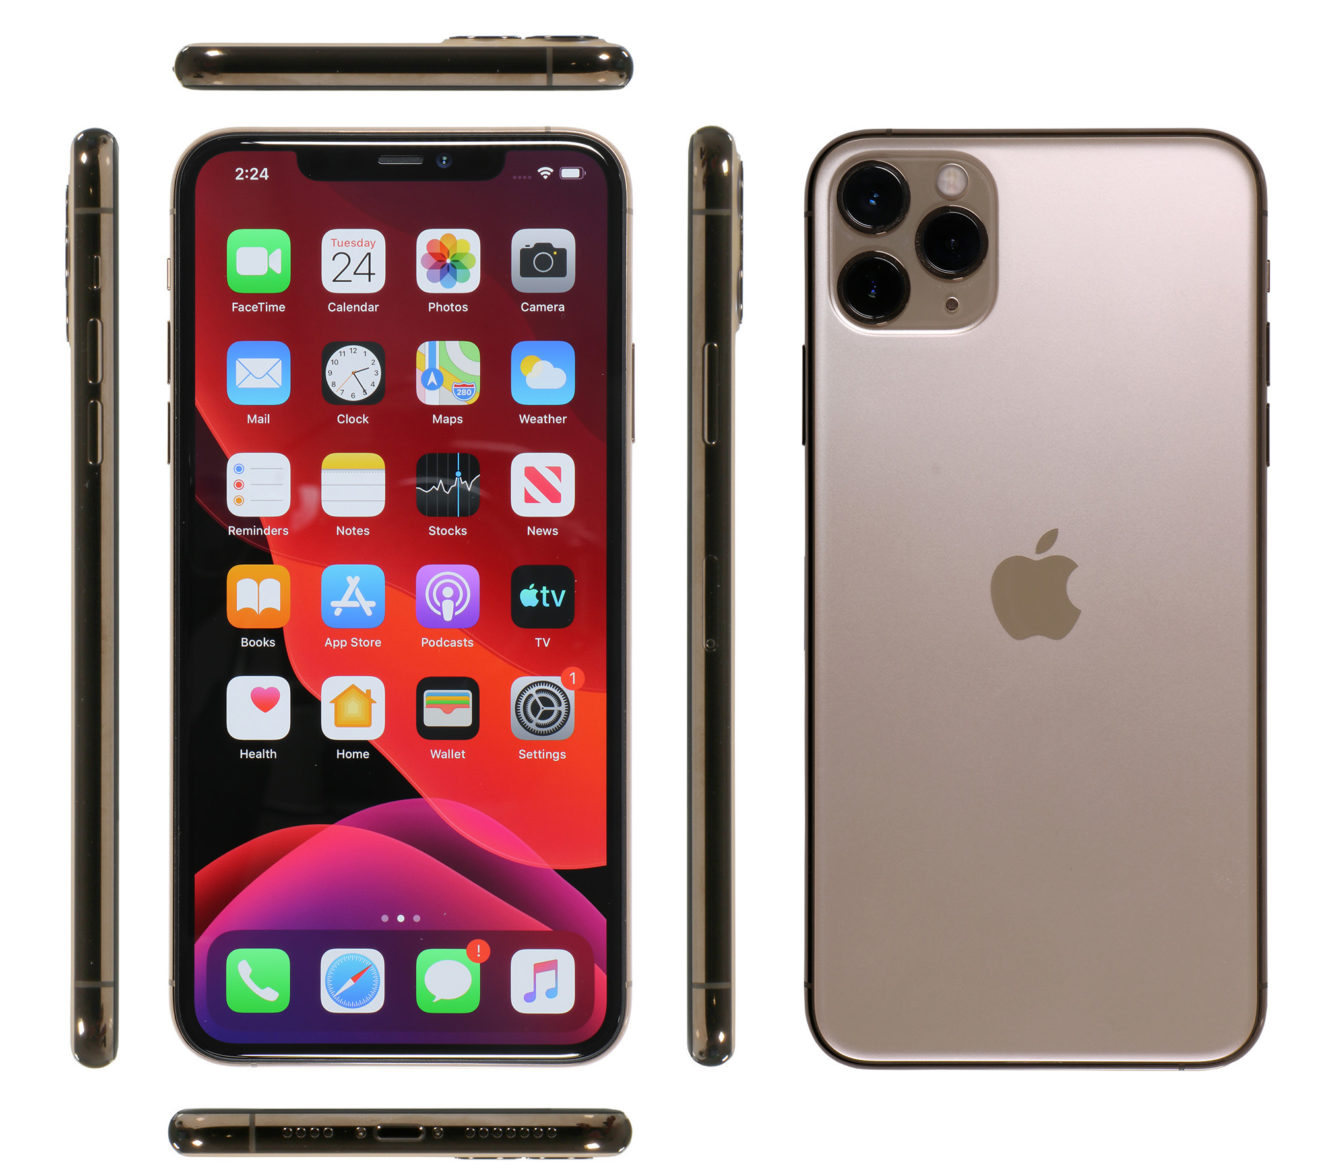 Apple iPhone 11 Pro Max Phone Specifications And Price – Deep Specs